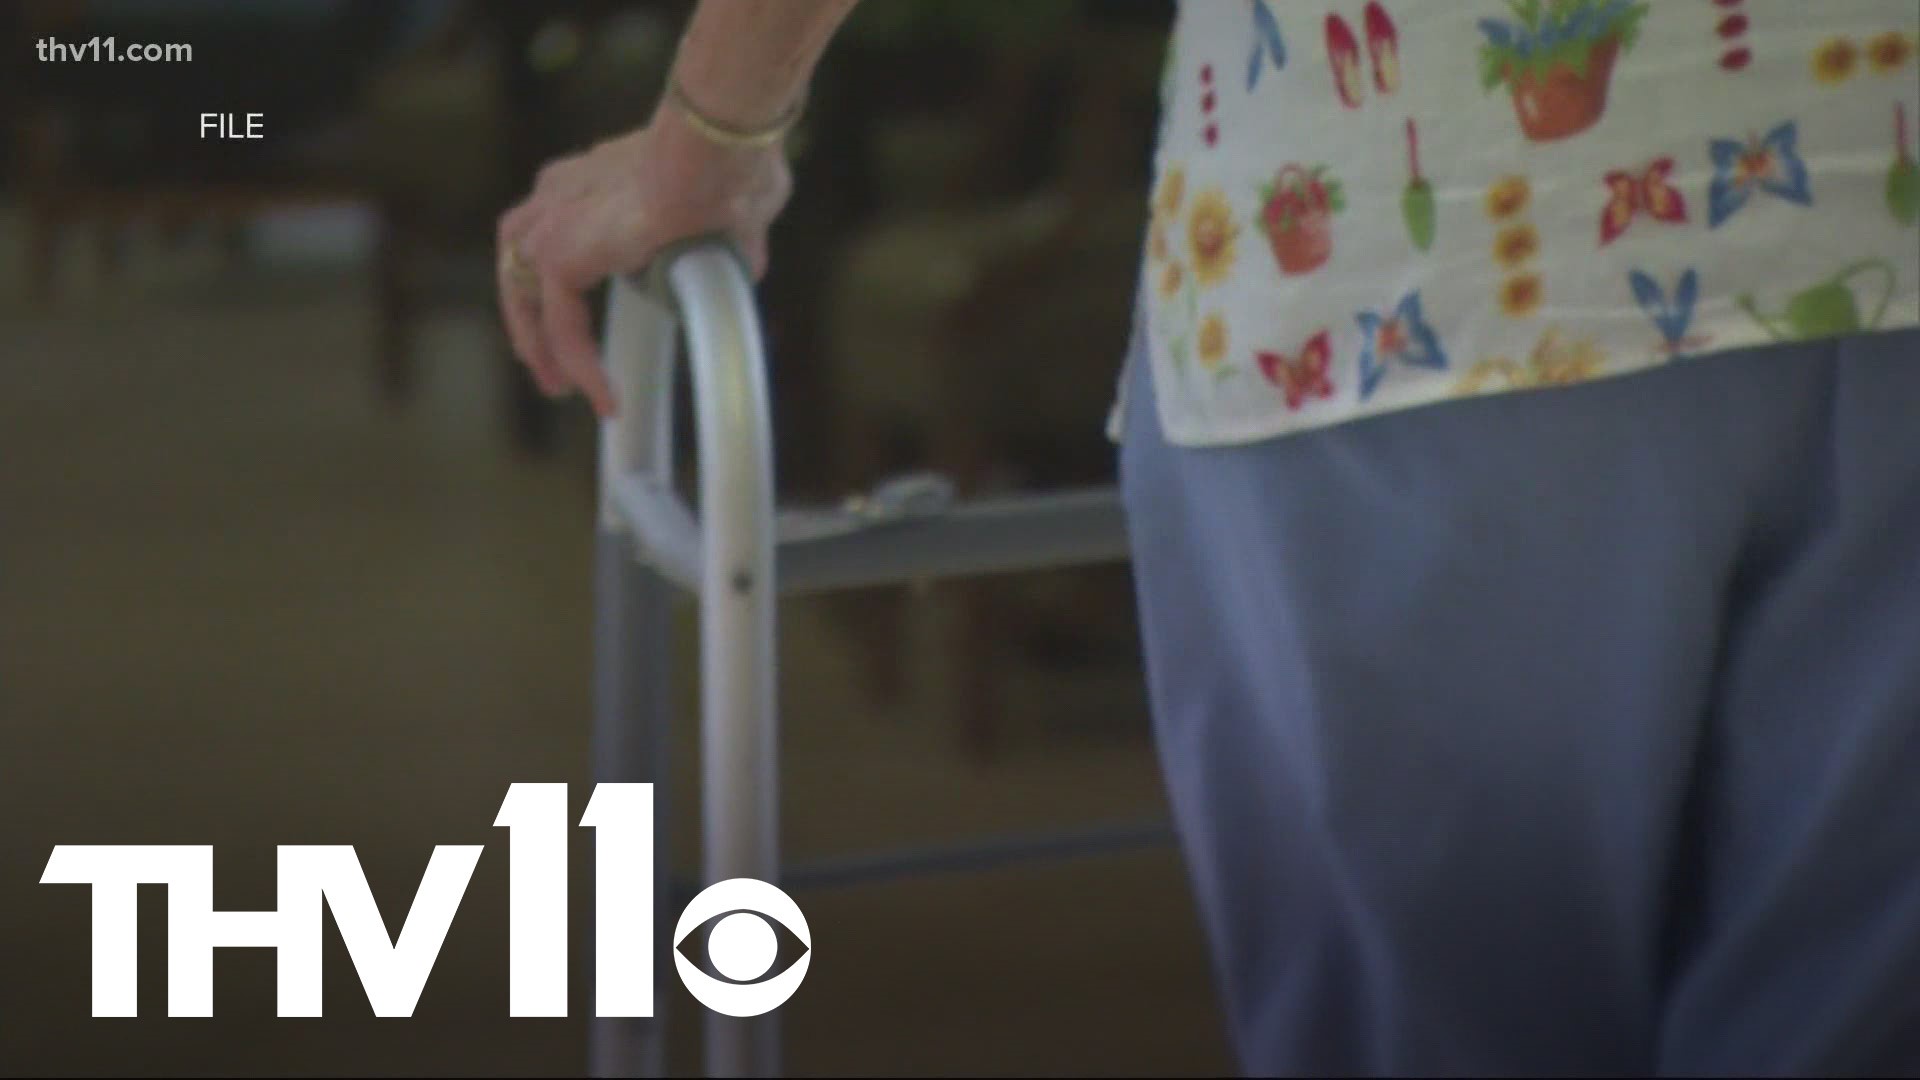 Recently updated federal guidelines for visitations at nursing homes is leaving some families confused and frustrated.